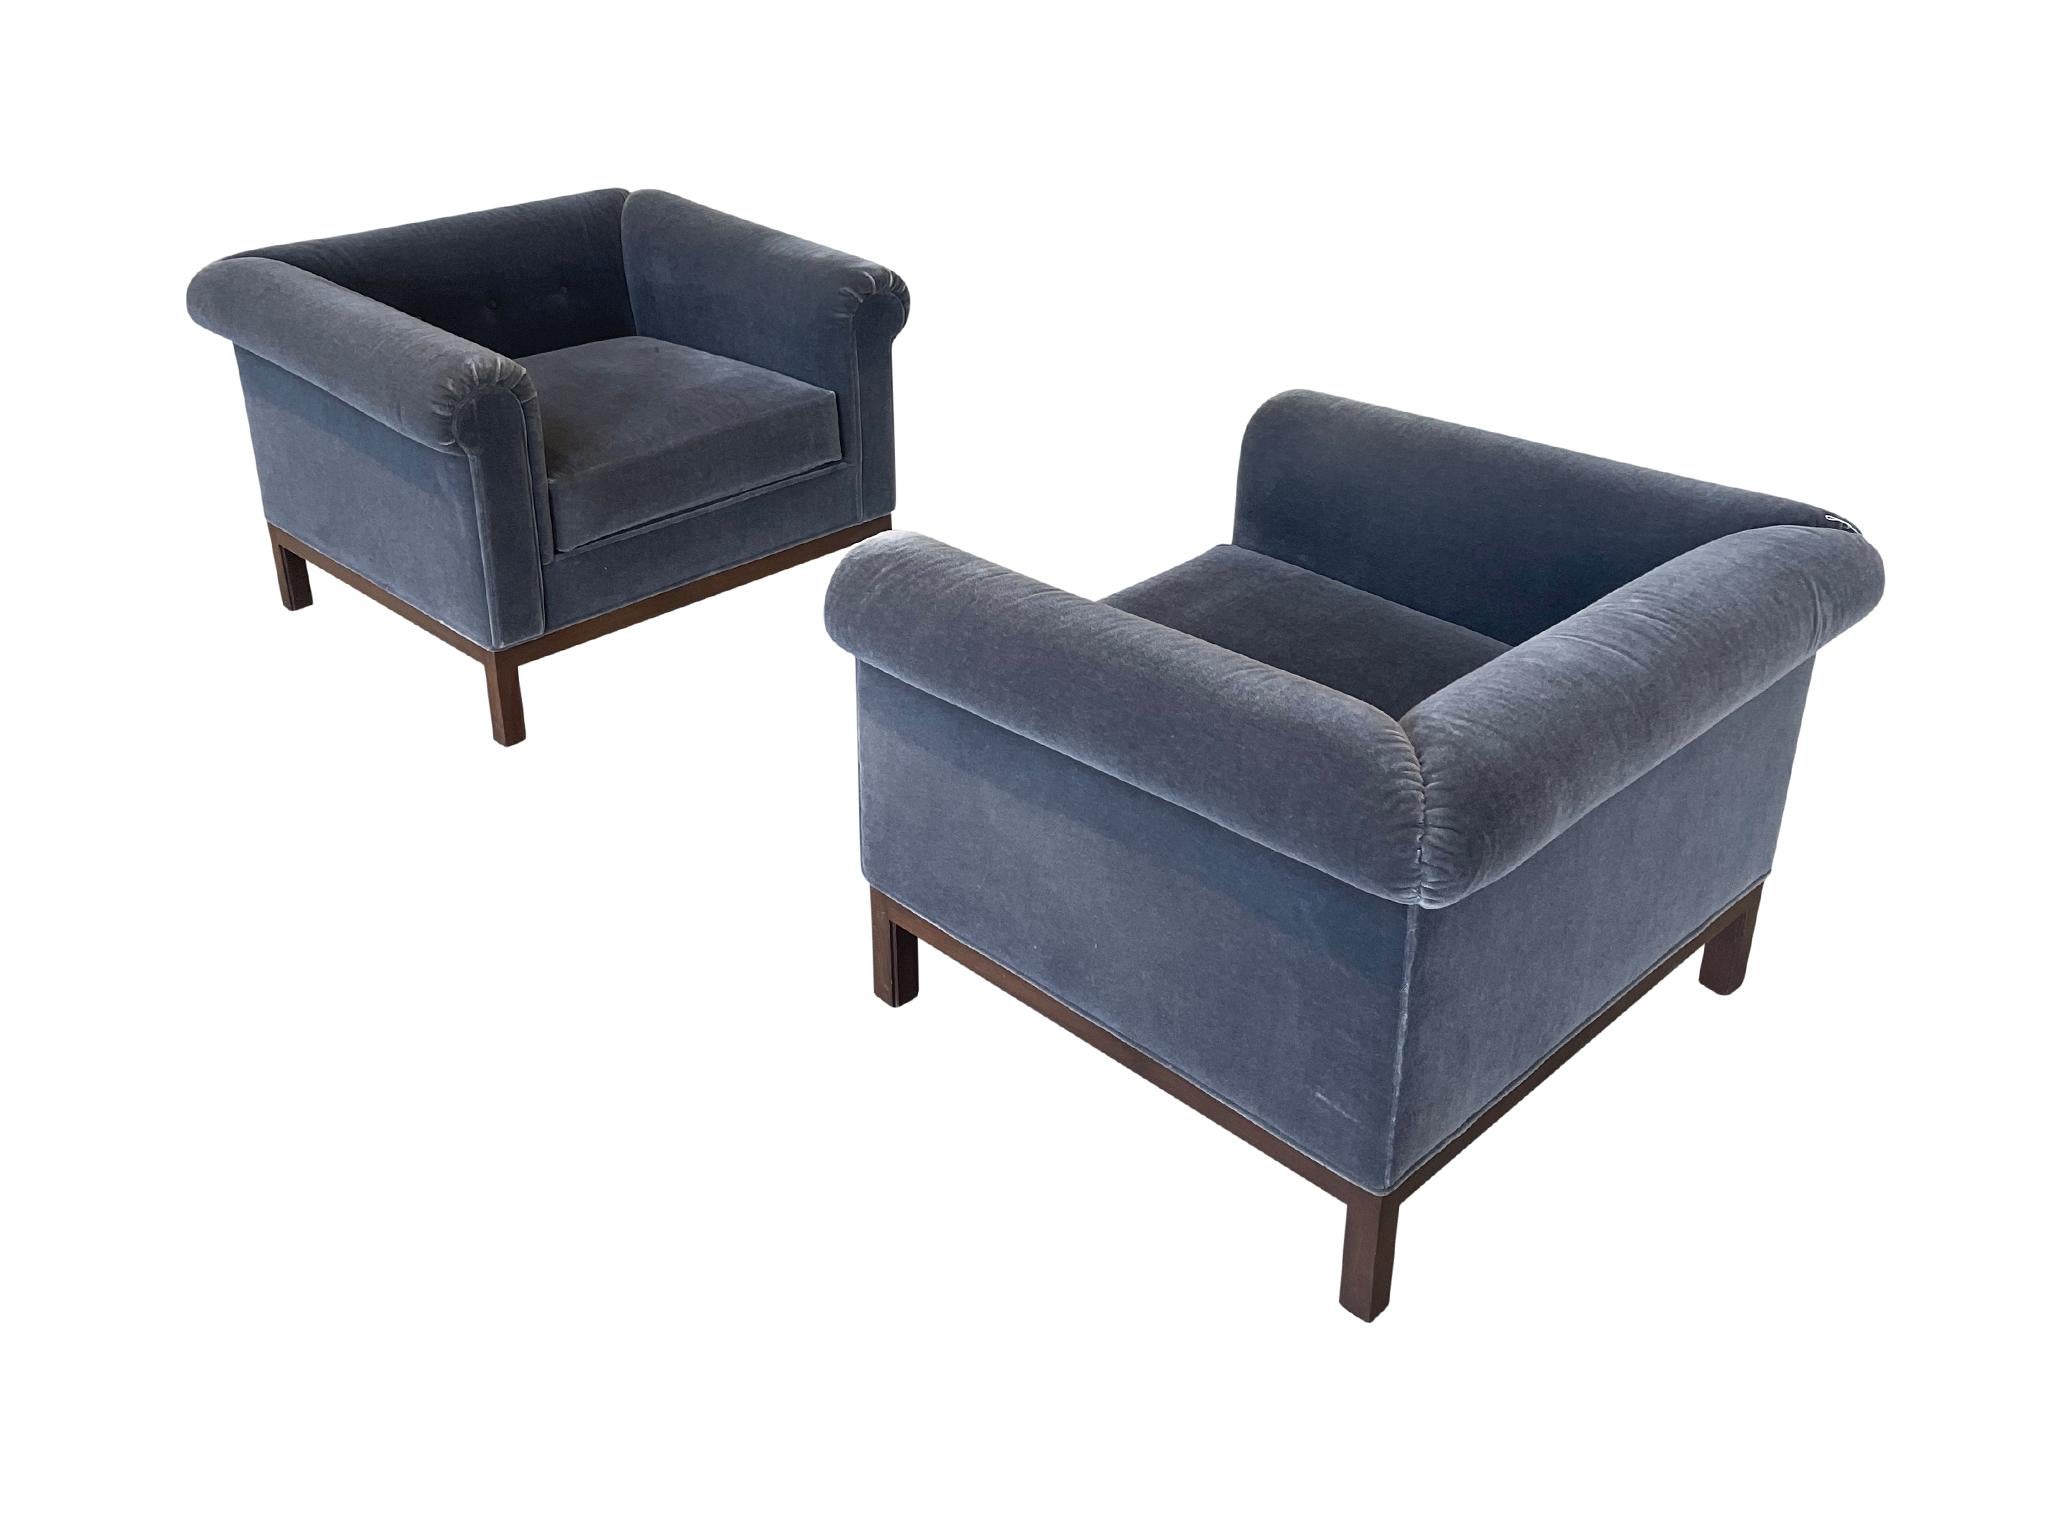 Pair of roll arm chairs designed by Roger Sprunger and manufactured by Dunbar in the 1970s. These classic club chairs have wide arms and backs, ideal for lounging. They have recent upholstery work in a smokey blue mohair that complements the walnut